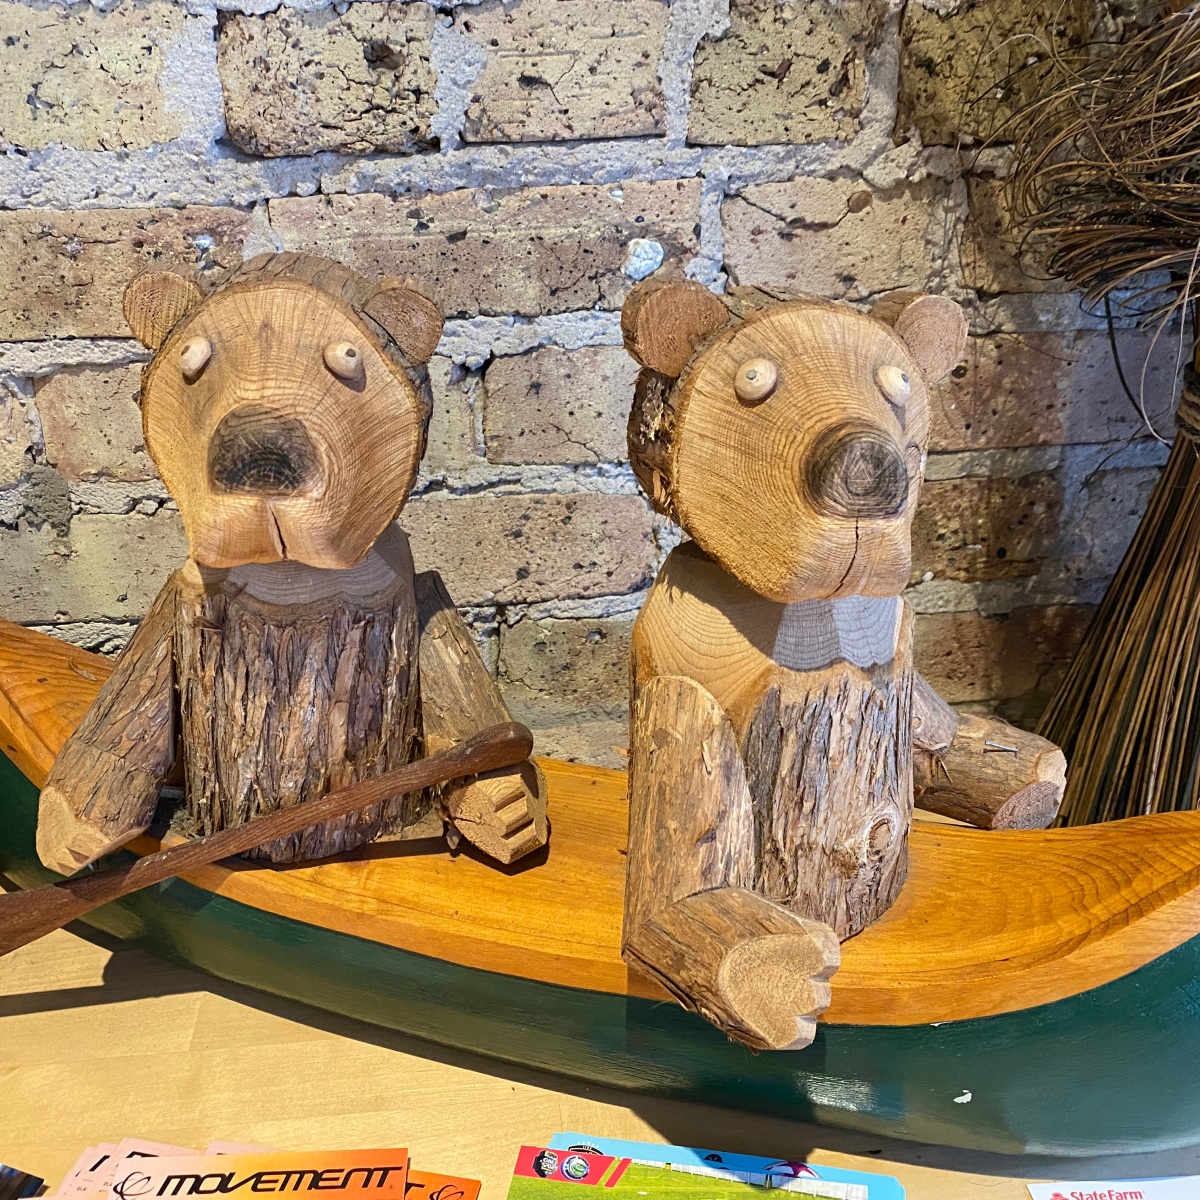 A Wood Carving – Creativity that makes us smile!